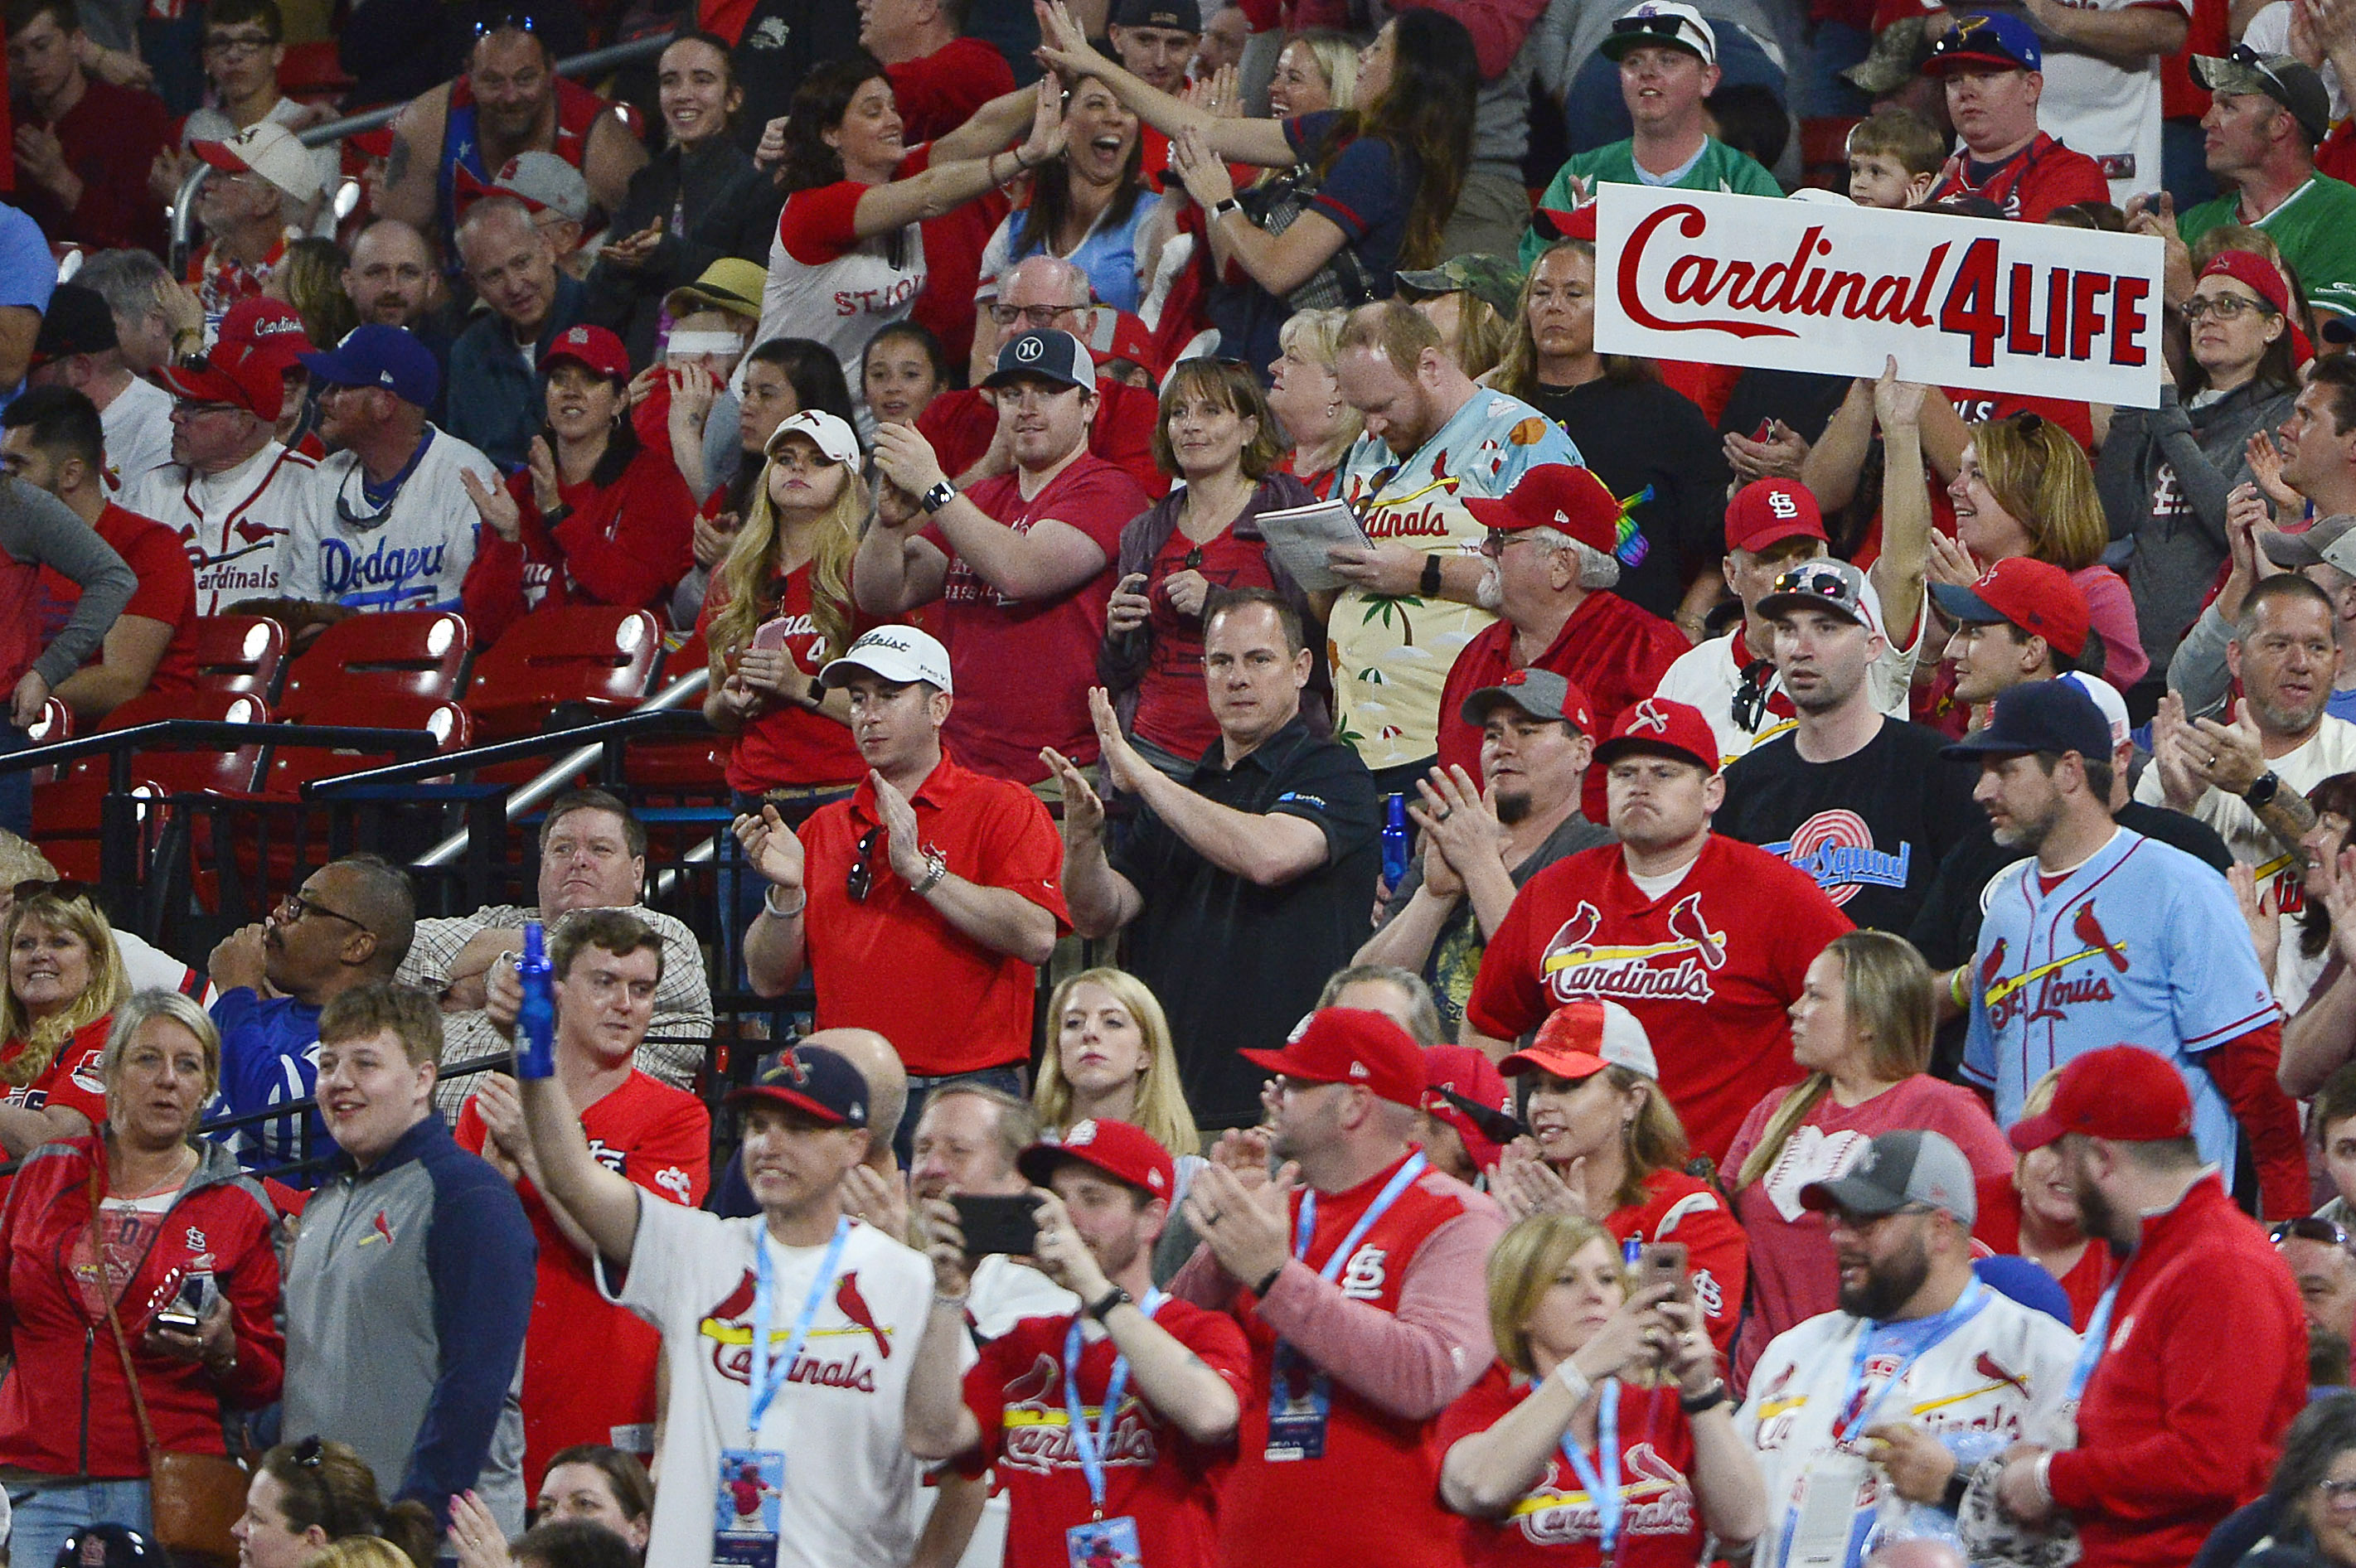 Cards' Offseason Changes Help Attendance Numbers